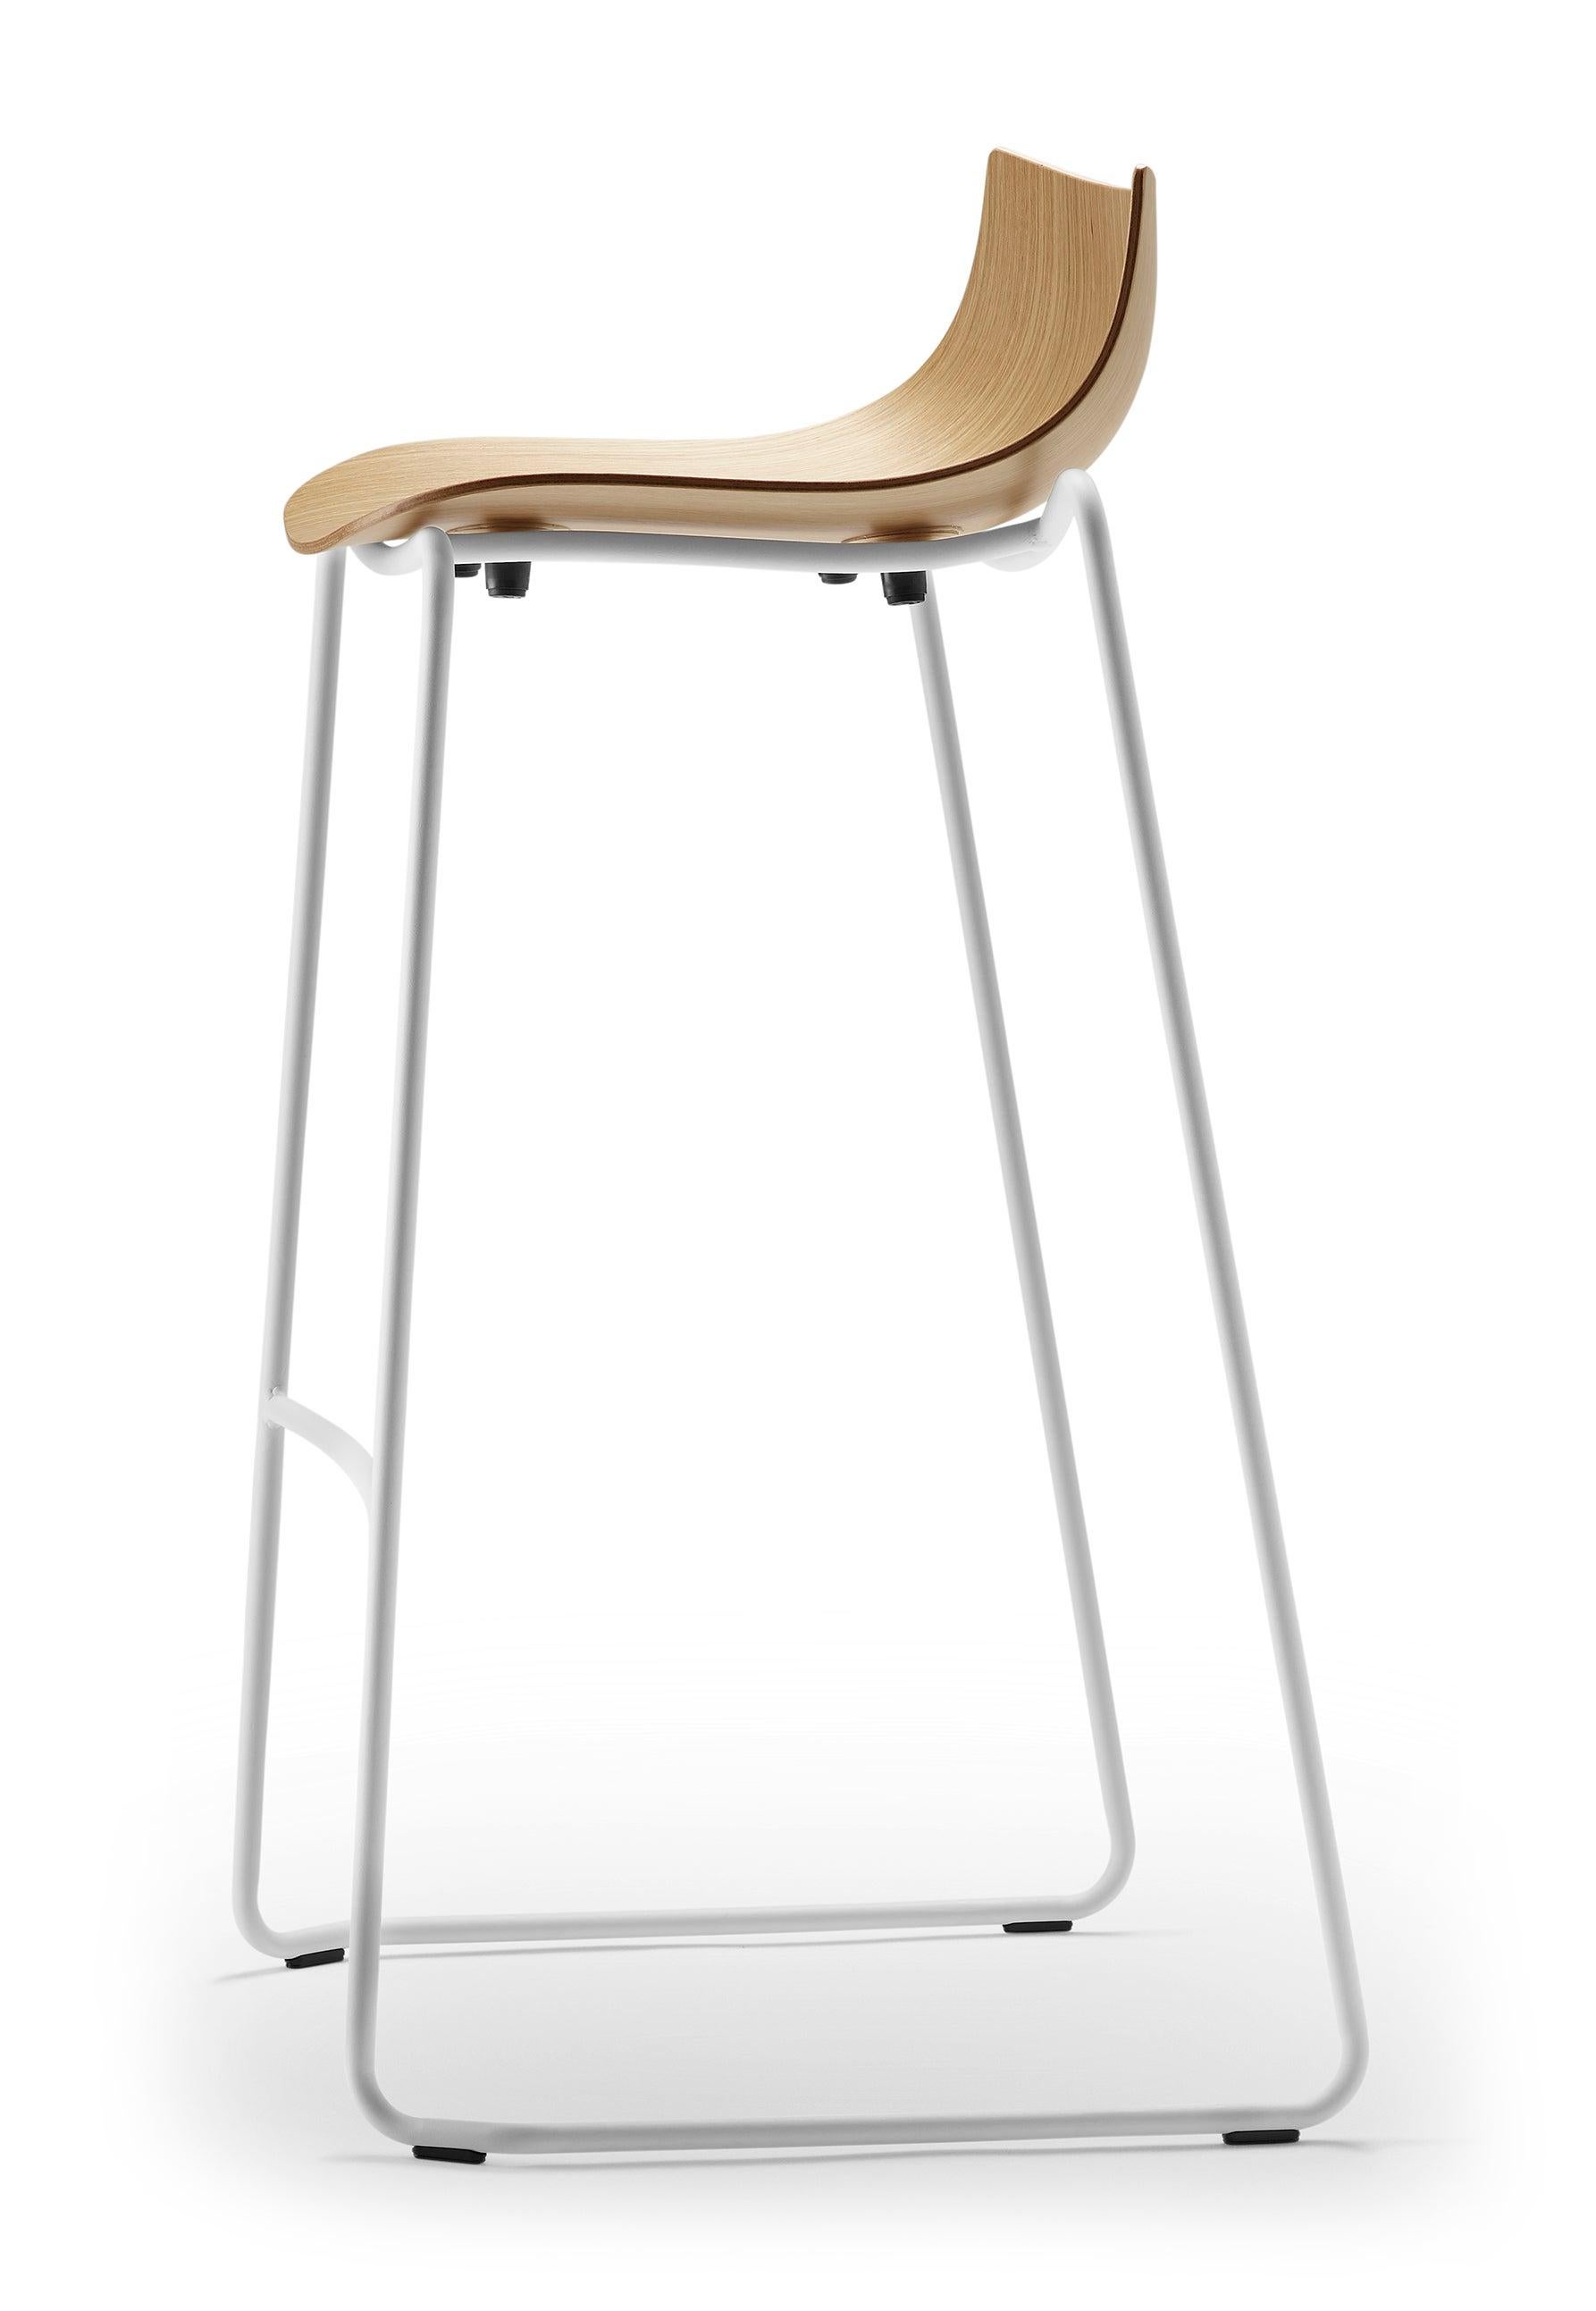 The BA004T Preludia bar chair by Brad Ascalon combines quality materials for an appealing and functional design. The chair has a well-crafted, solid construction that is light and uncomplicated in form. It can be paired with other items from the